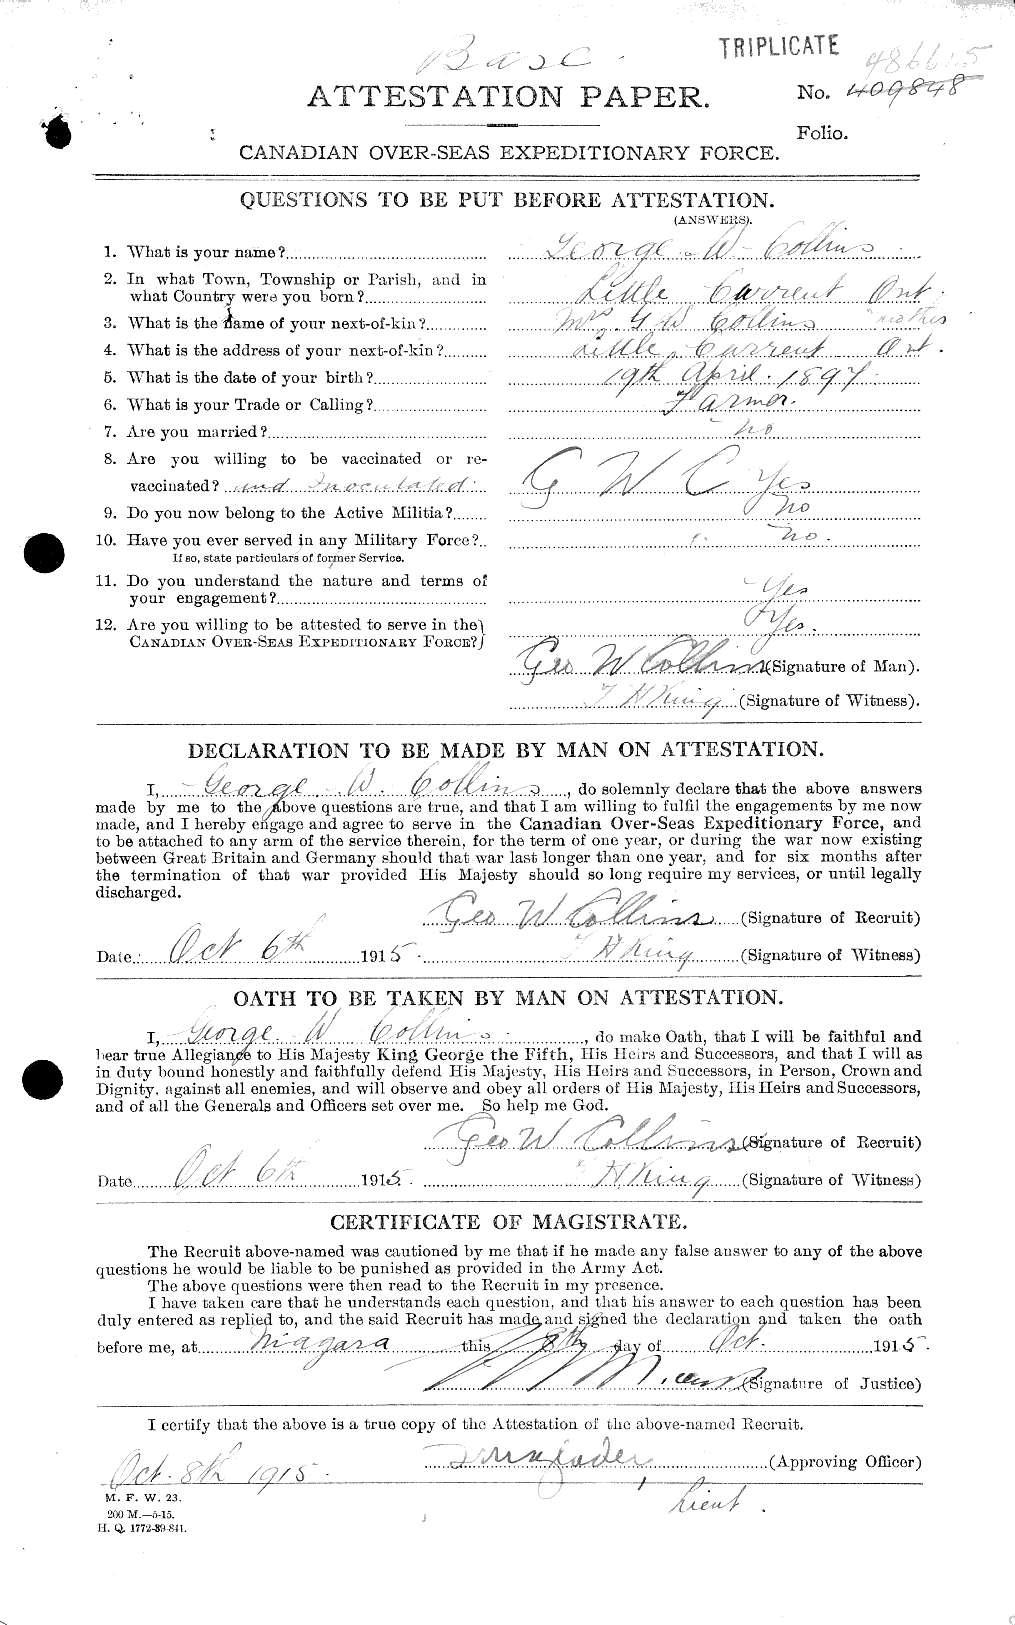 Personnel Records of the First World War - CEF 037878a